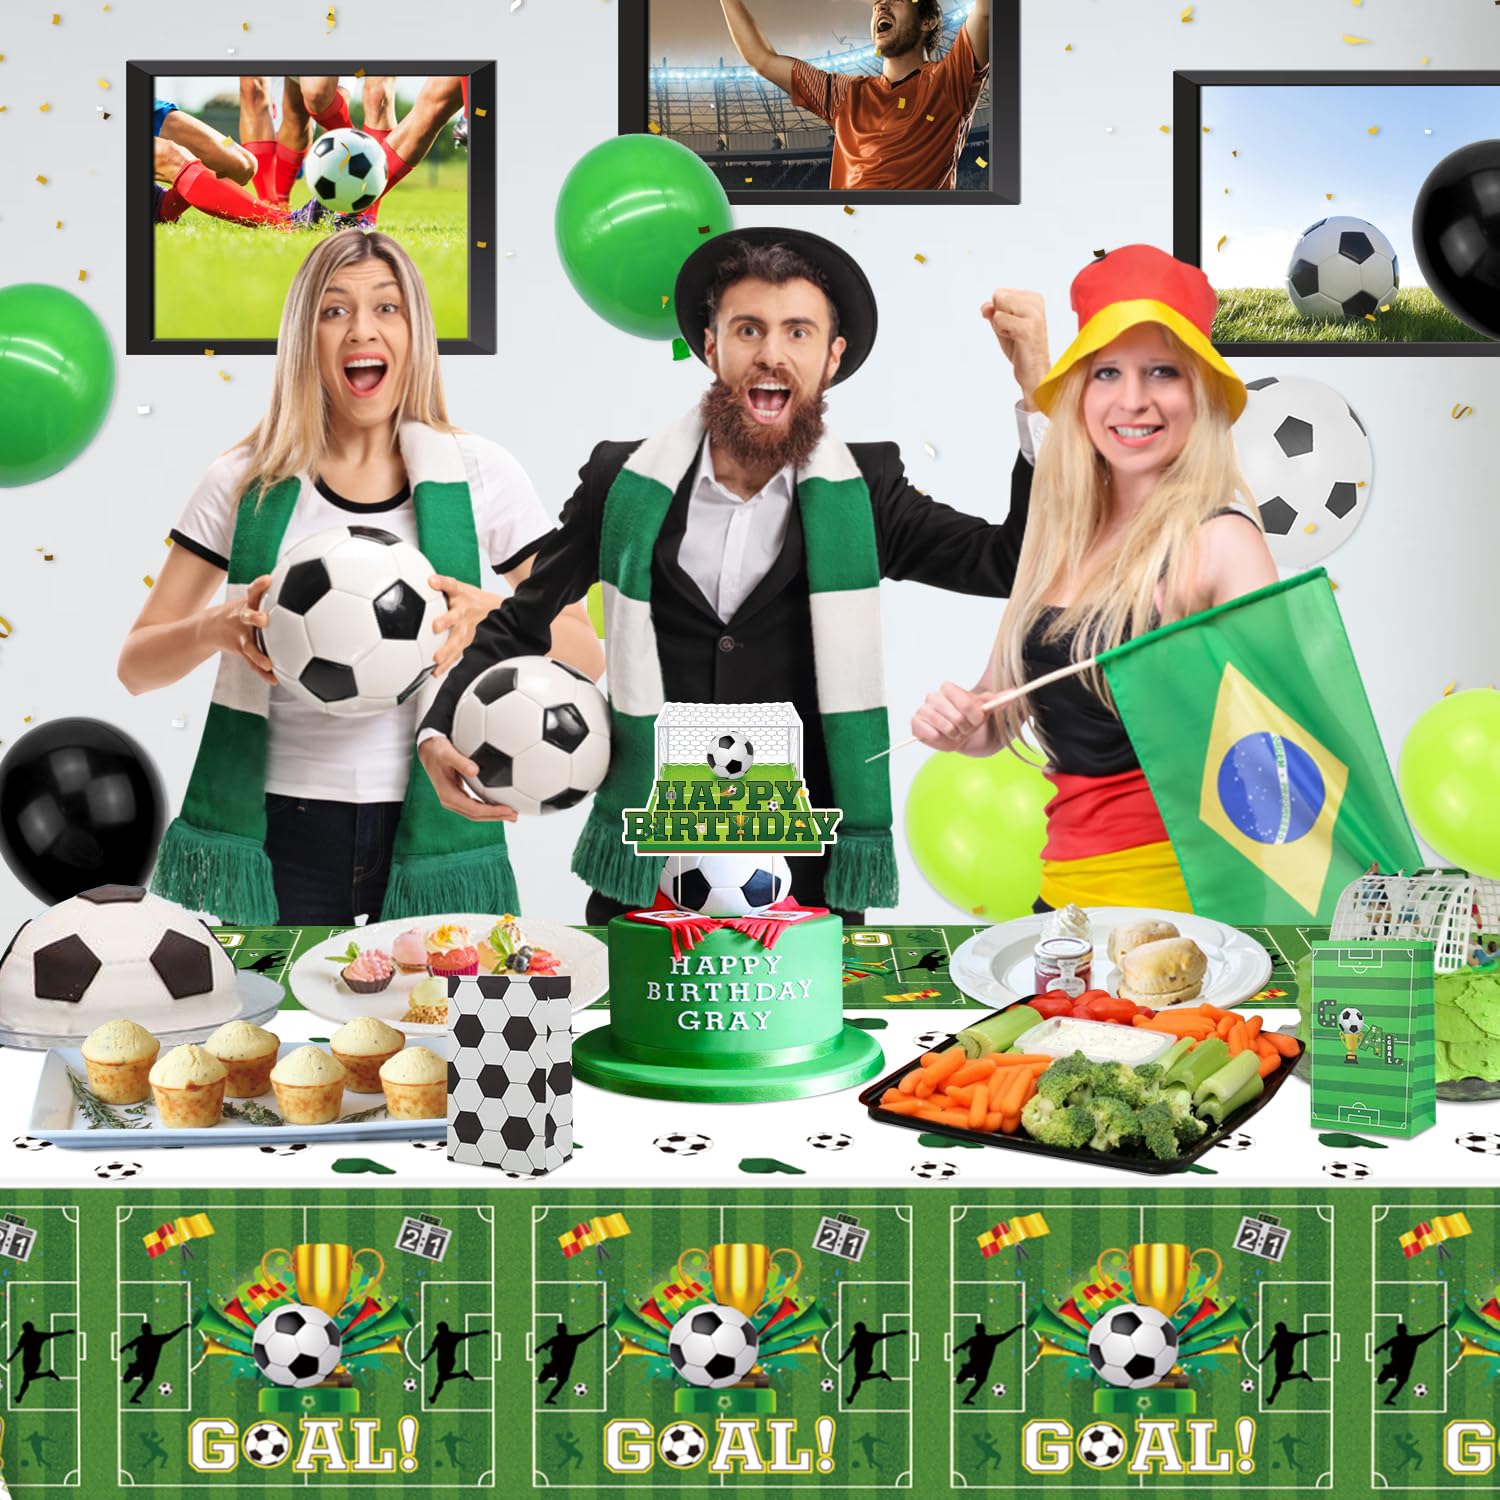 Inspireyee 4 Pack Football Party Tablecloths Football Birthday Decorations 51'' X 86'' Sports Theme Party Table Covers Football Theme Table Cloth for Rectangle Tables Birthday Party Supplies Favors